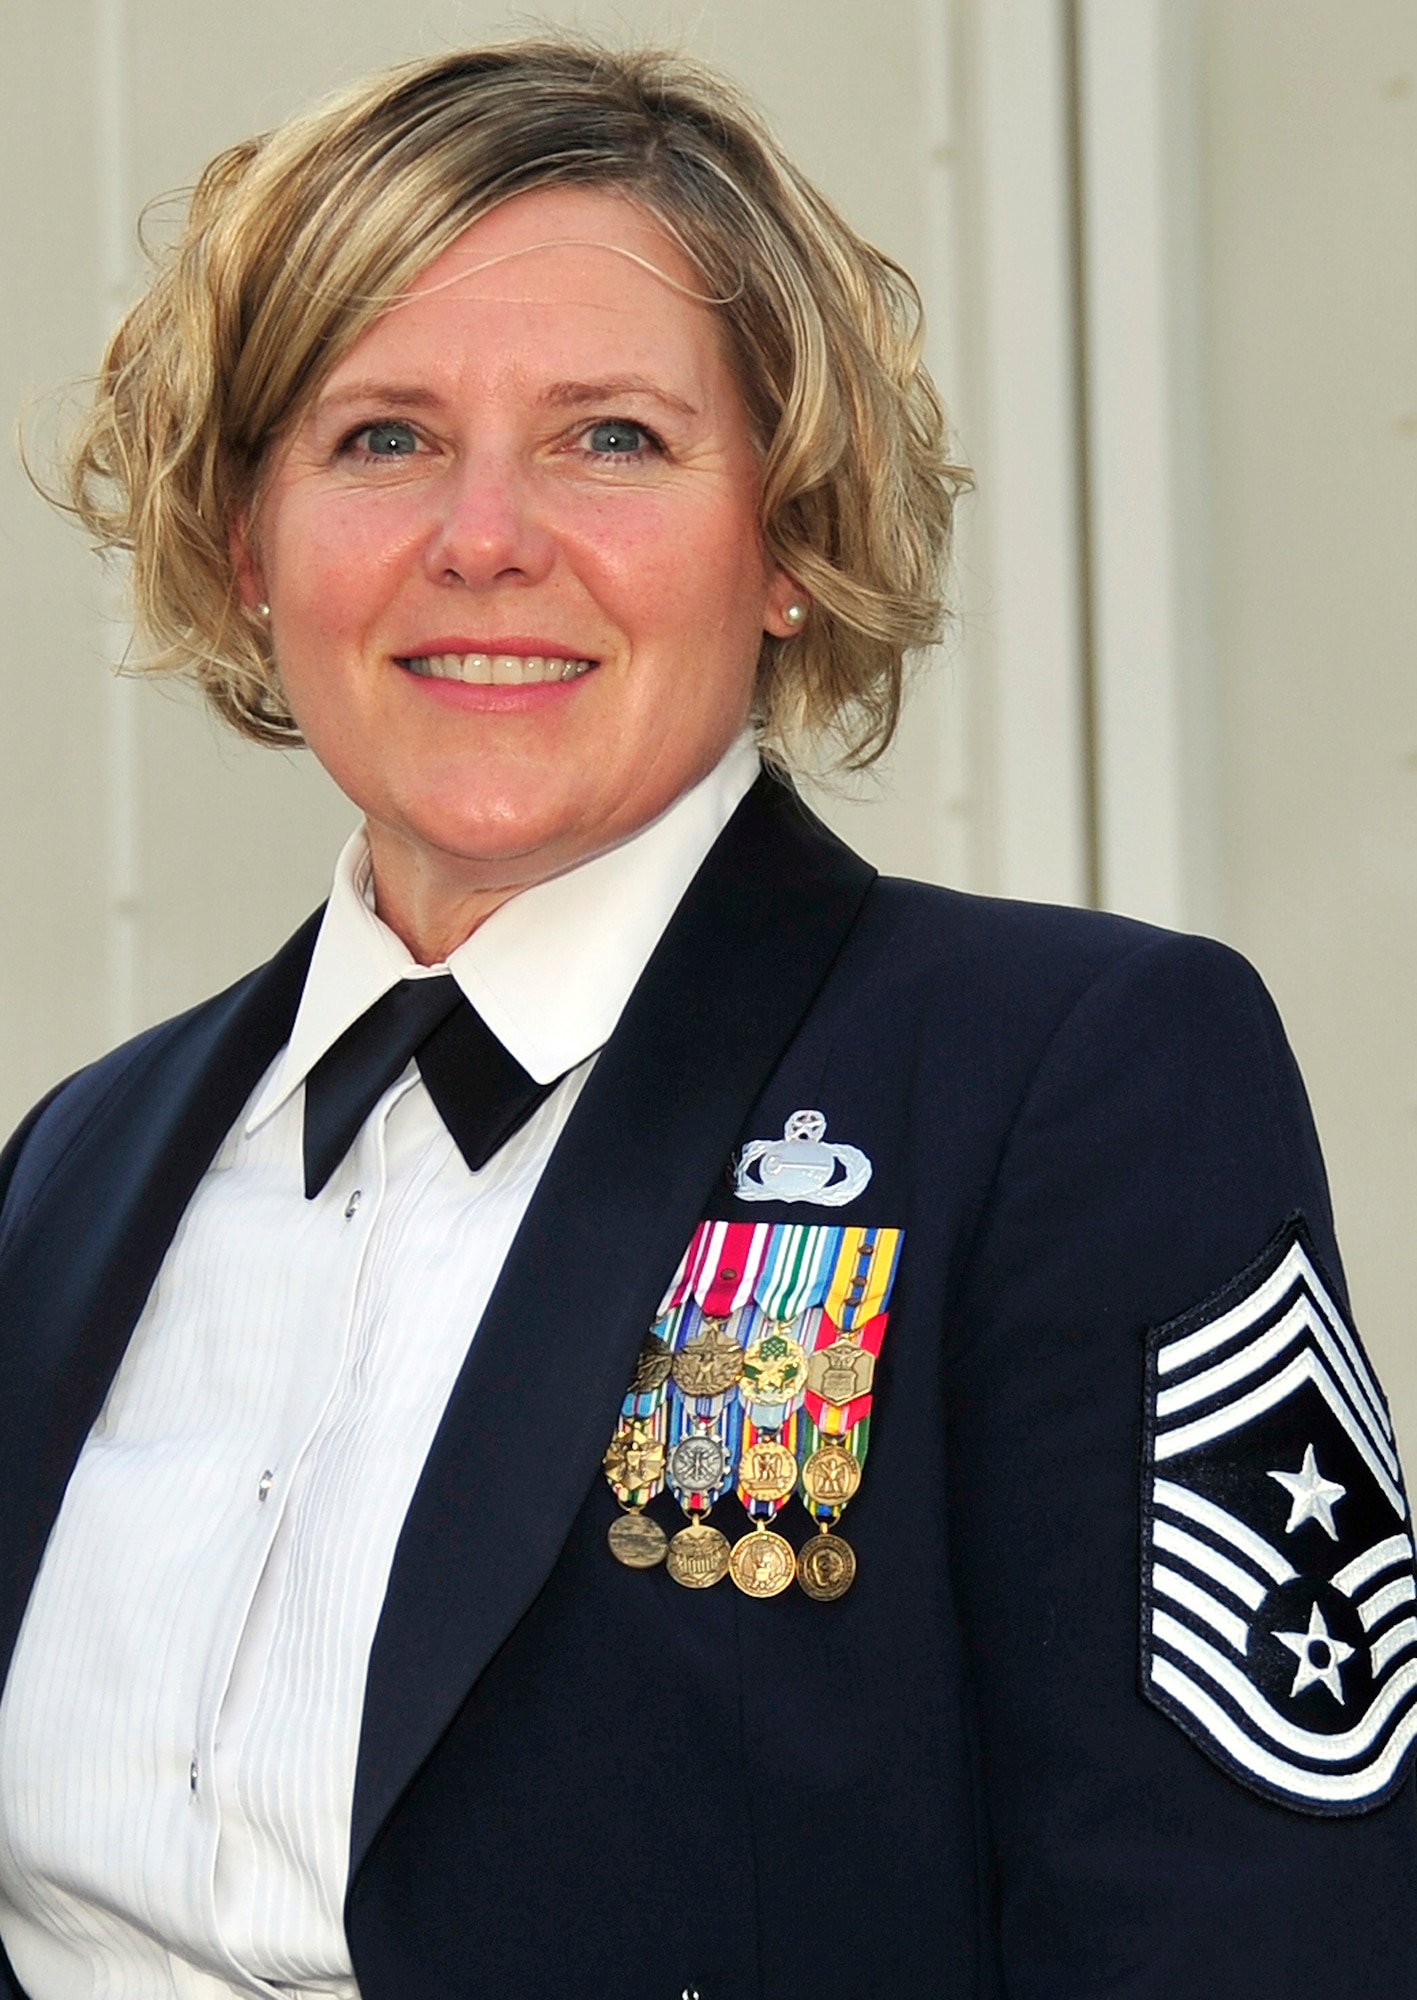 Chief Master Sgt. Suzan K. Sangster, command chief master sergeant for the 380th Air Expeditionary Wing at a non-disclosed base in Southwest Asia, stops for a photo prior to attending a military ball on Nov. 5, 2009.  Chief Sangster is a 27-year veteran of the Air Force and is the Air Force's only command chief master sergeant serving at a deployed wing in the U.S. Central Command area of responsibiltiy.  (U.S. Air Force Photo/Tech. Sgt. Charles Larkin Sr./Released)